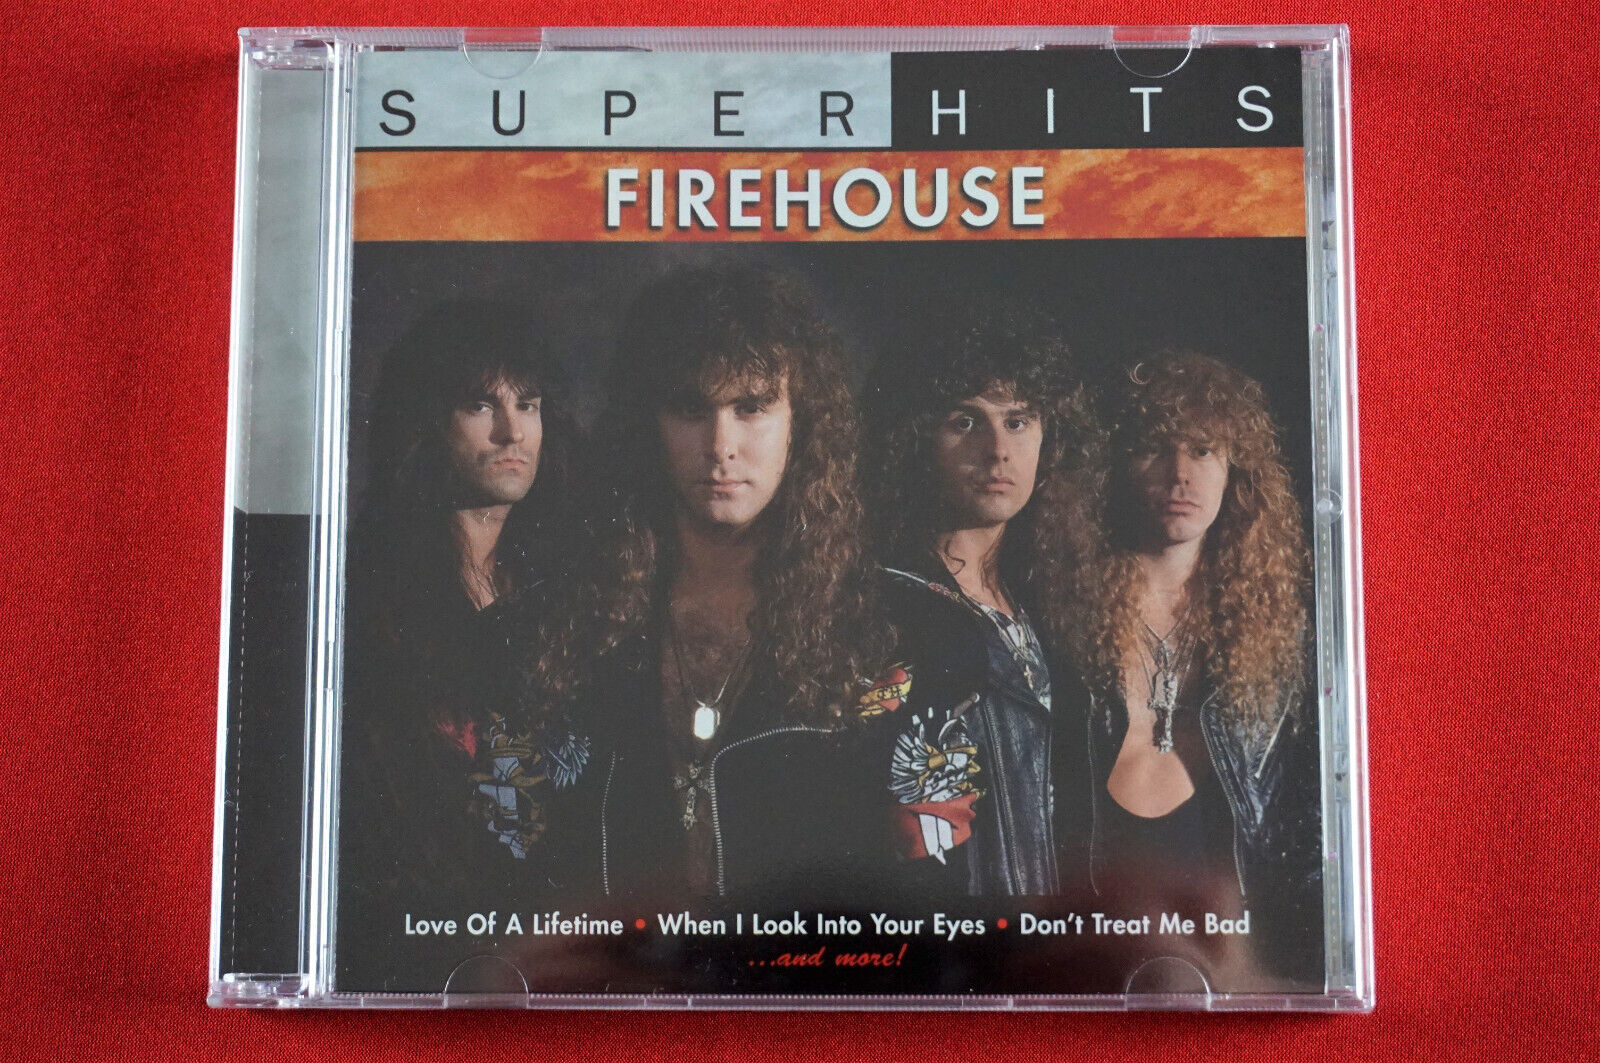 Firehouse Super Hits CD All She Wrote Love Of A Lifetime Treat Me Bad New Sealed